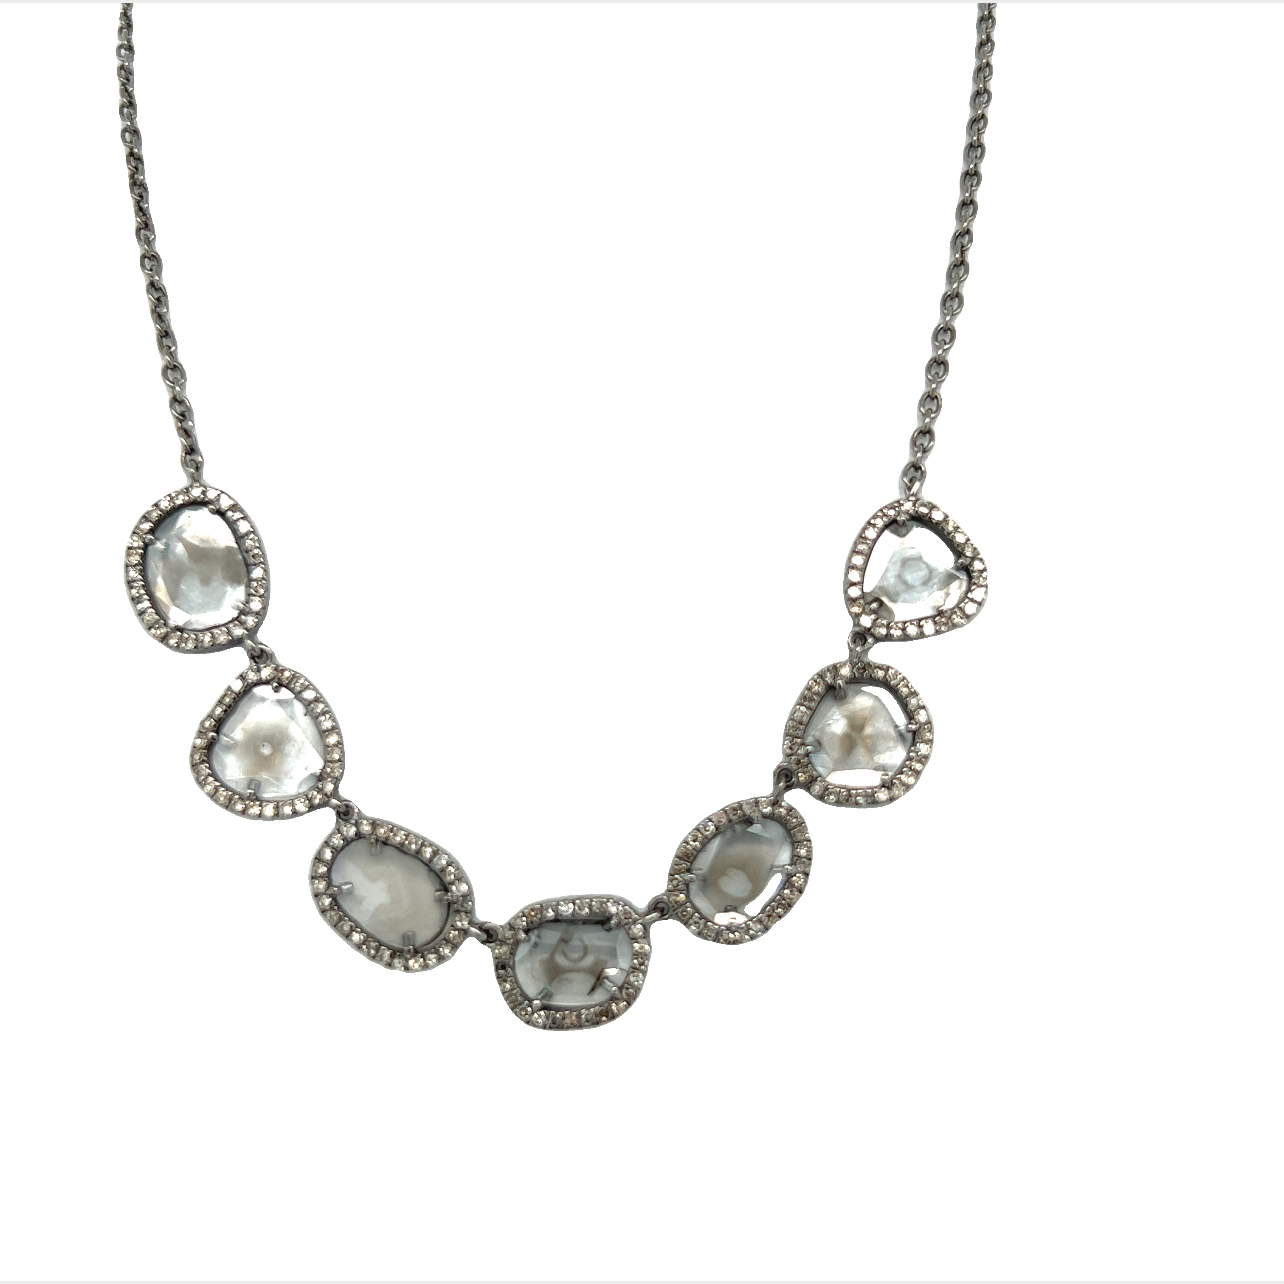 Featured image for “Champagne Diamond 7 Slices Necklace”